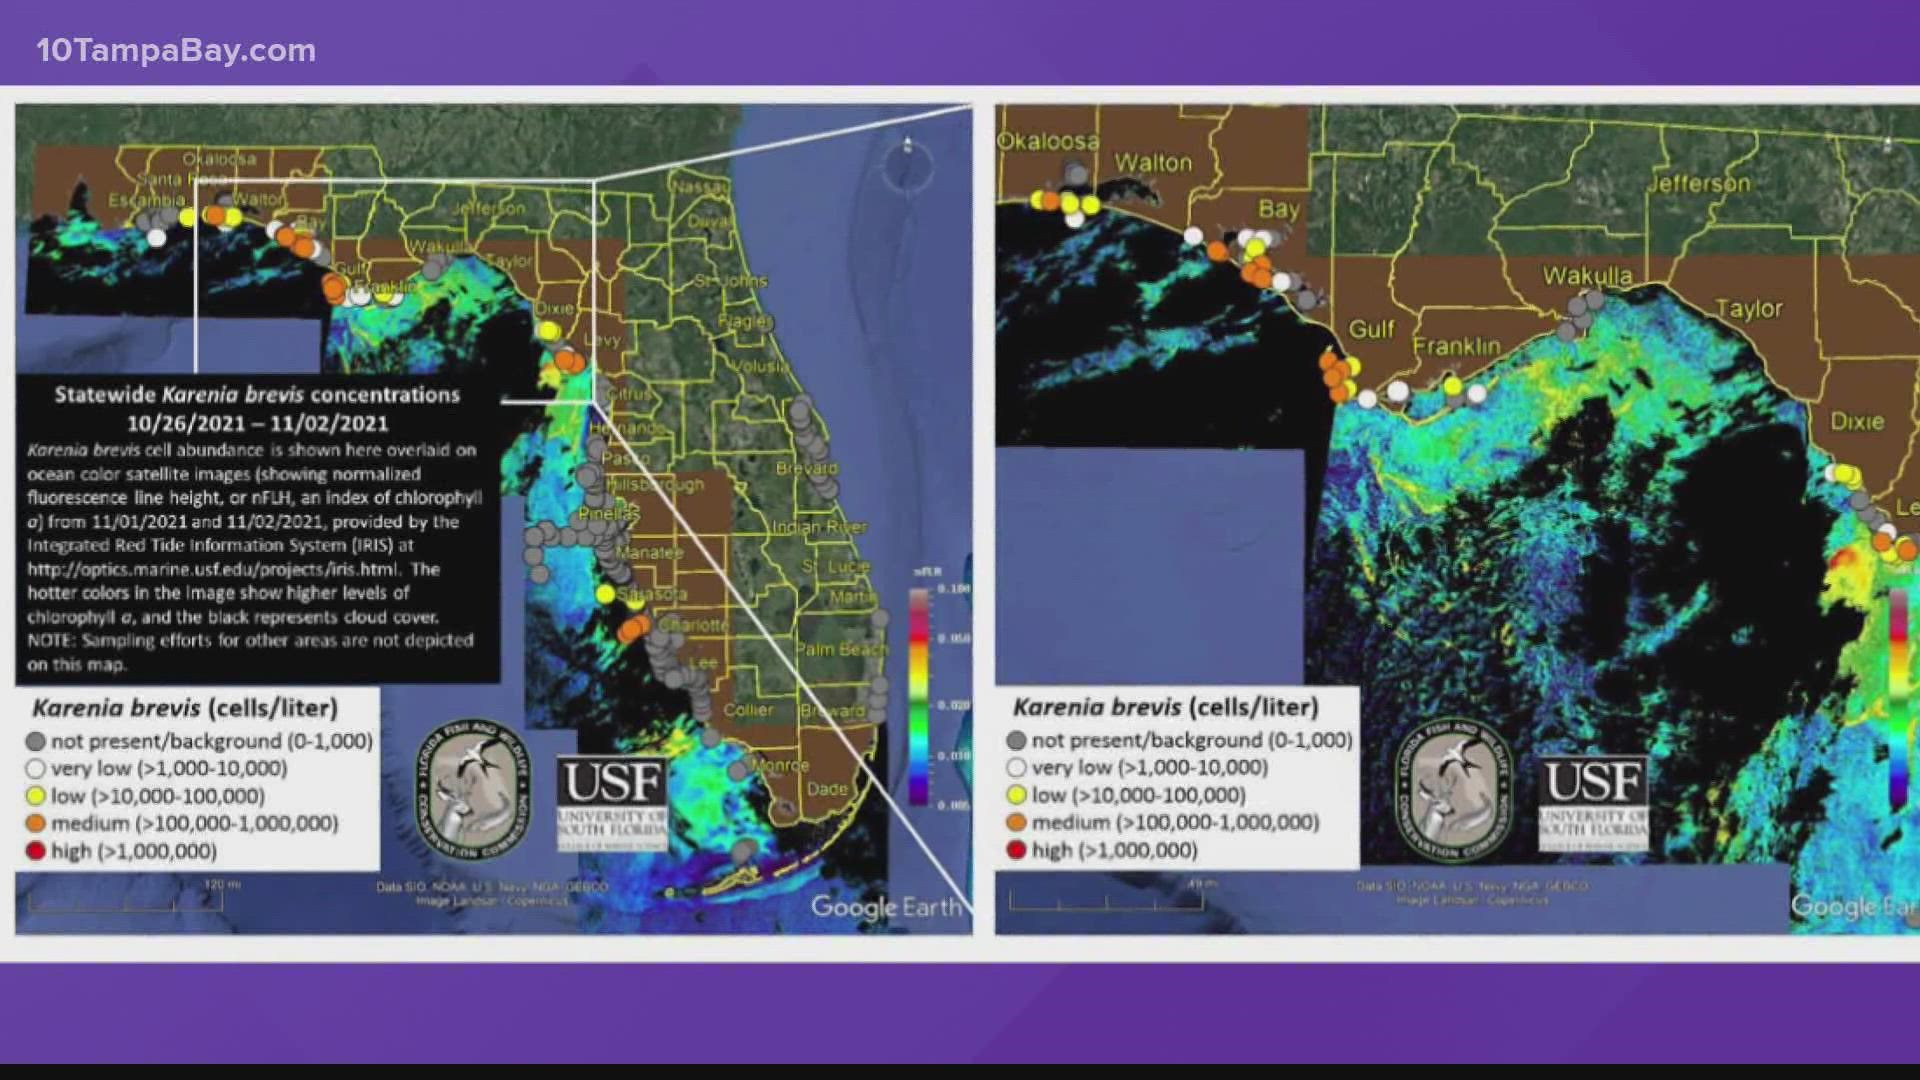 Concentrations of the red tide organism were only present at beaches in Hillsborough and Sarasota counties.